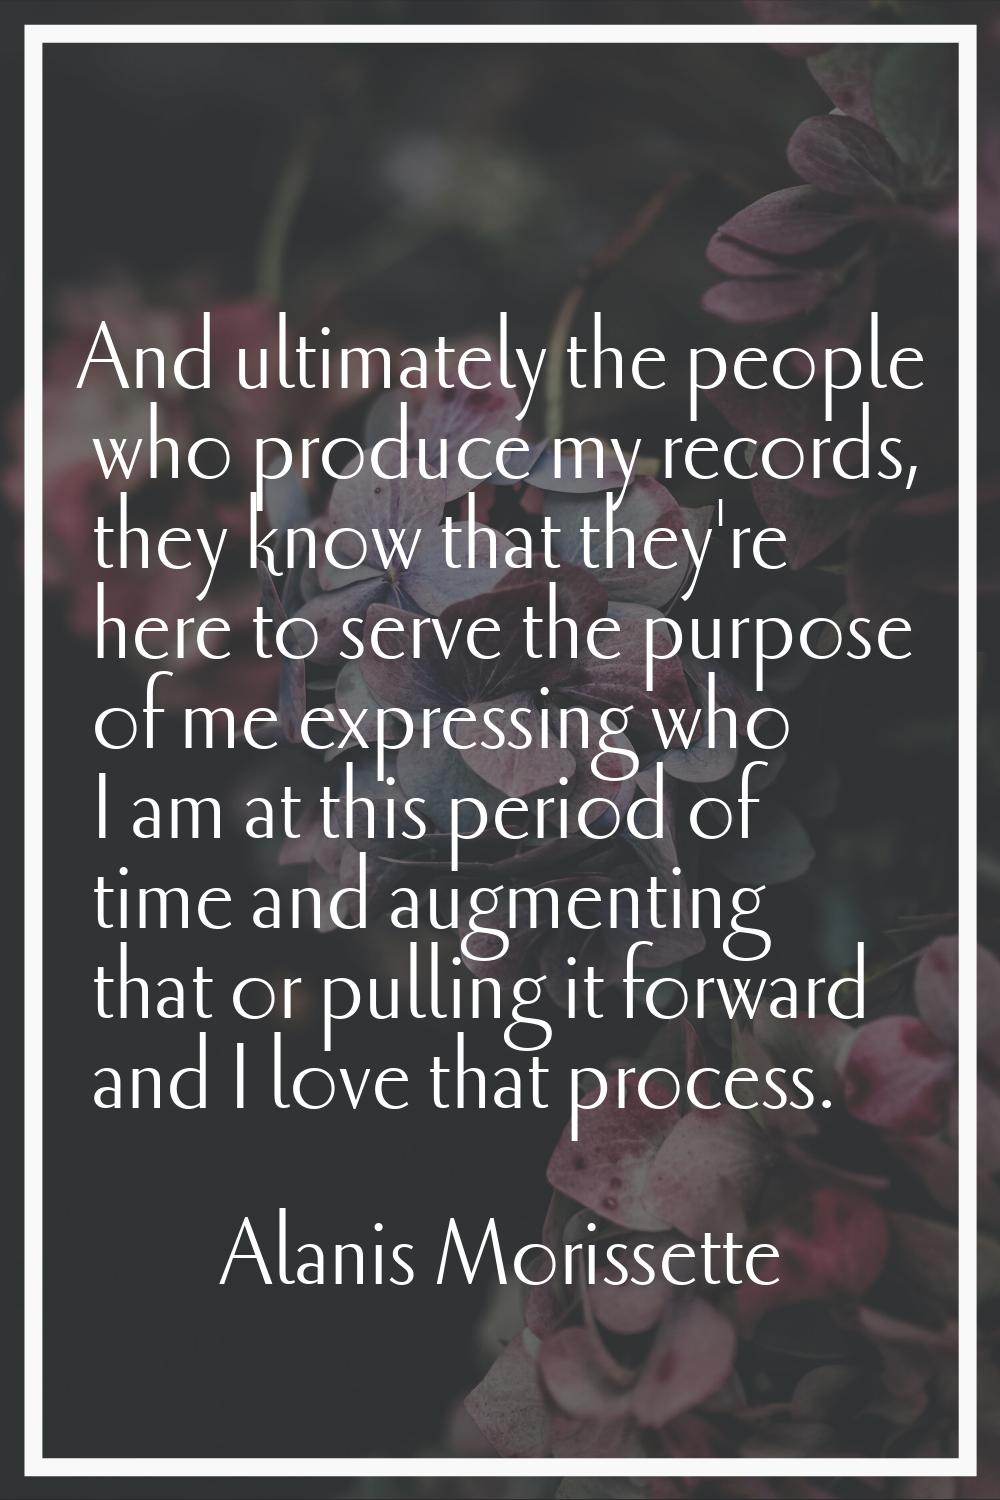 And ultimately the people who produce my records, they know that they're here to serve the purpose 